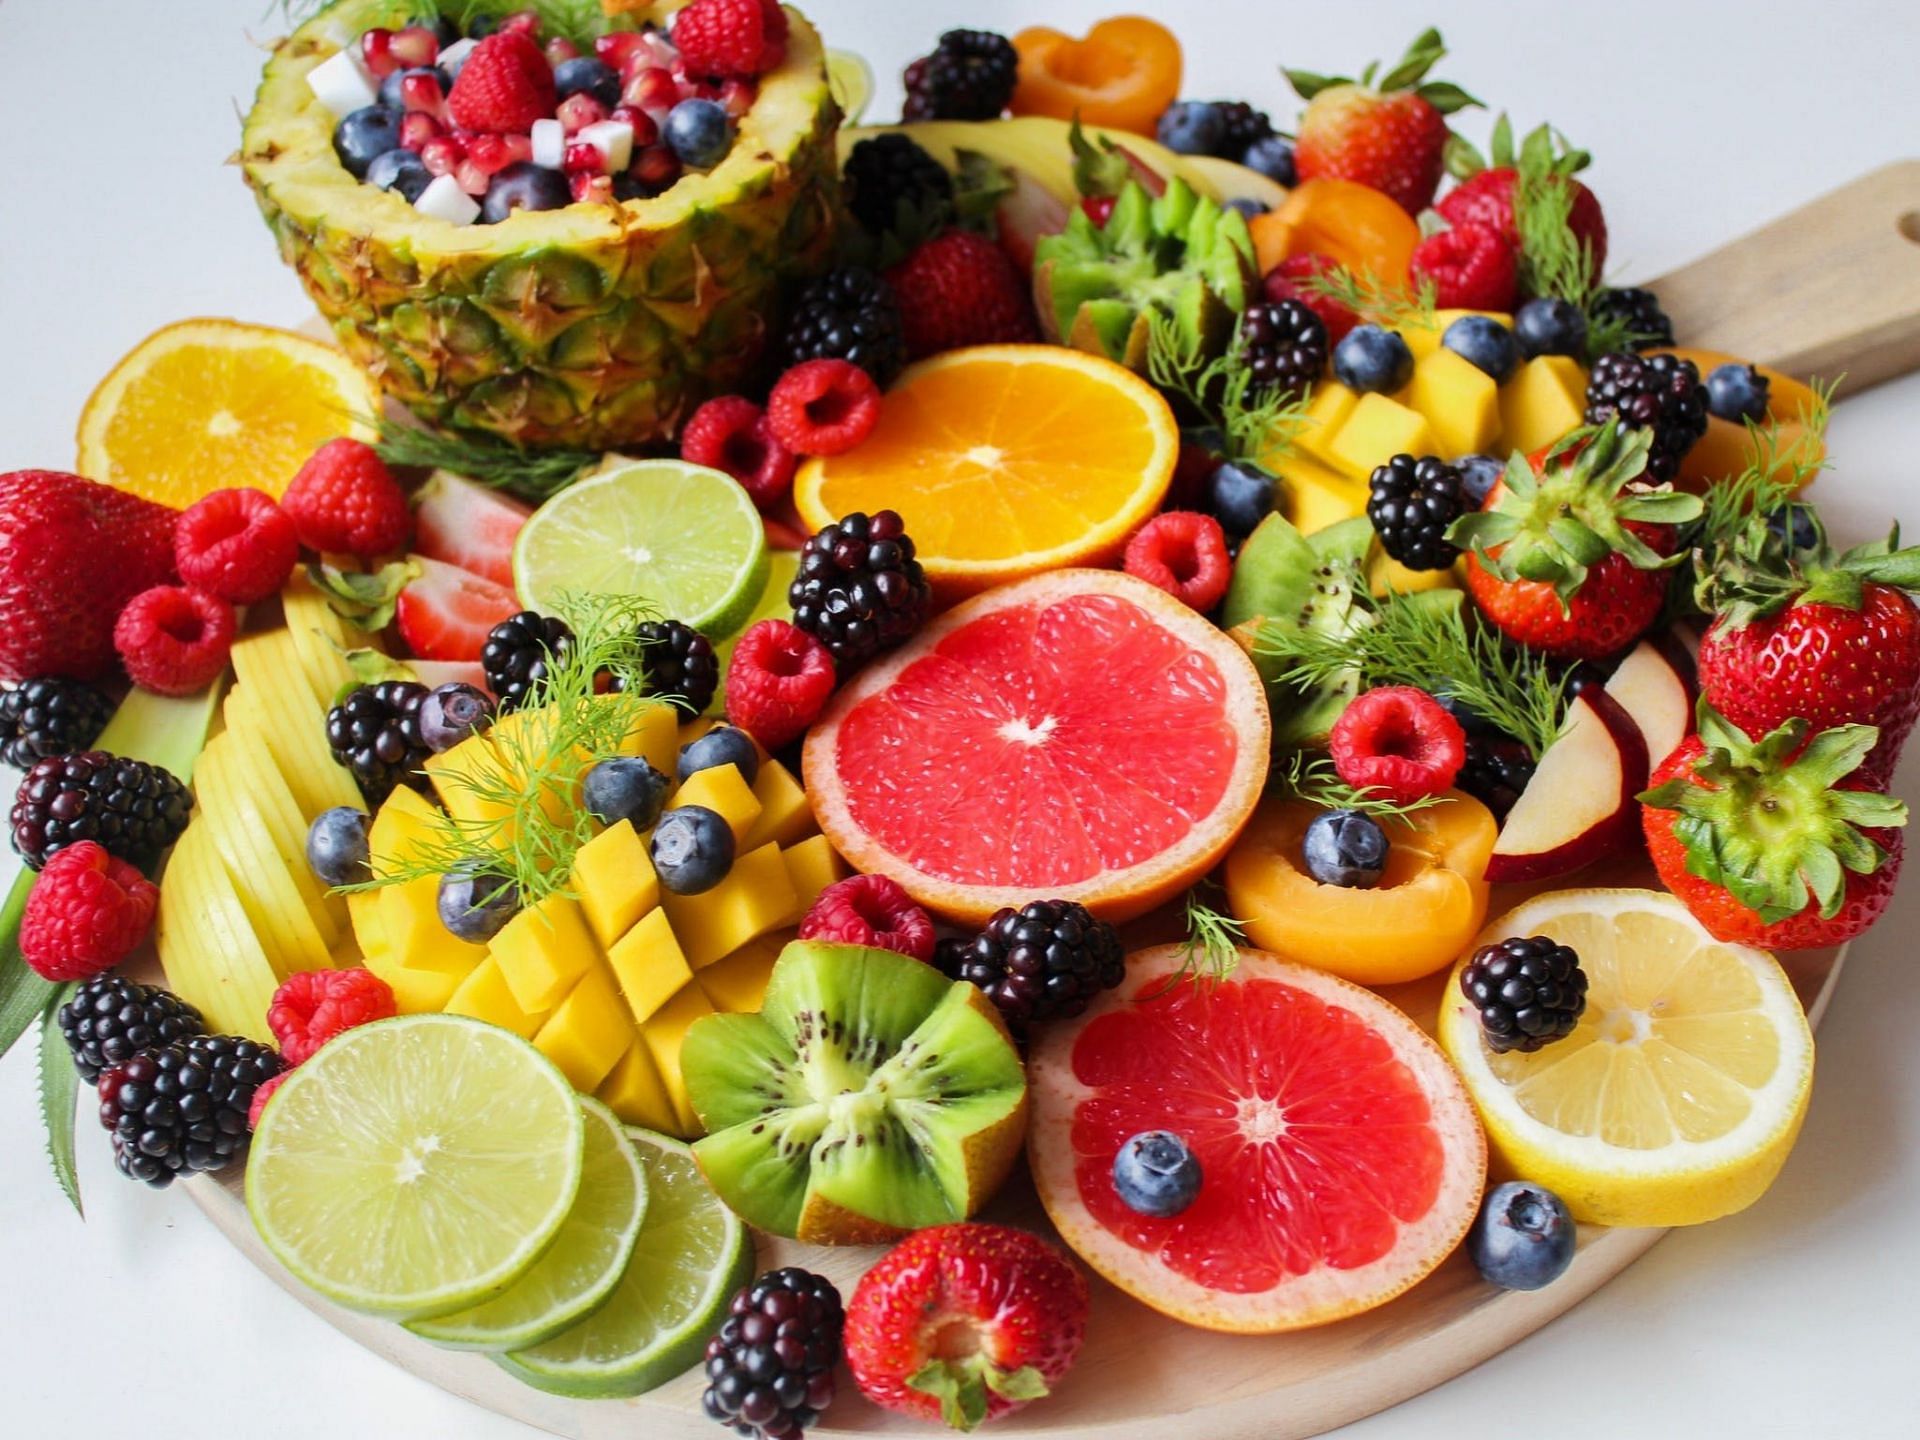 Importance of fruits in hormonal acne diet (image sourced via Pexels / Photo by jane doan)